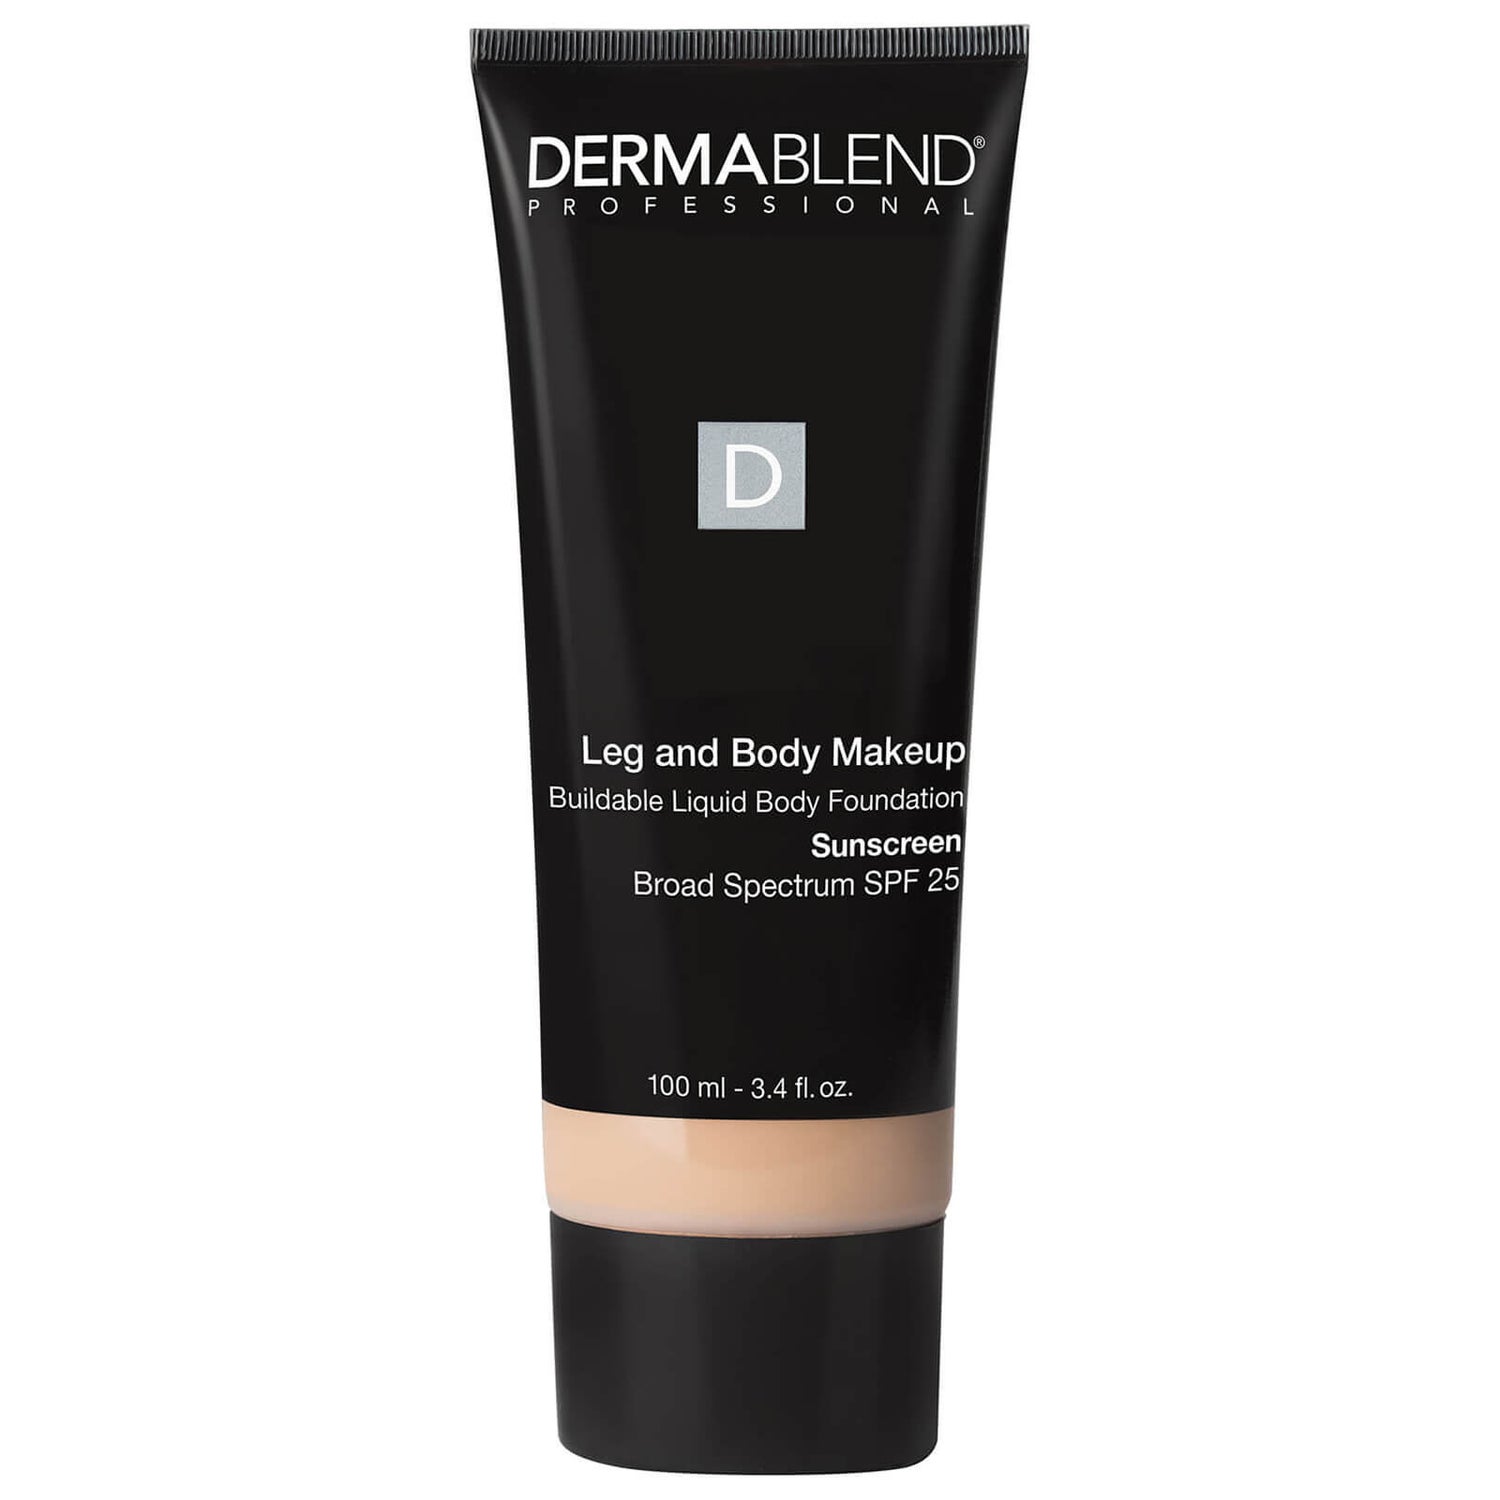 Dermablend Leg and Body Makeup Foundation with SPF 25 (3.4 fl. oz.)